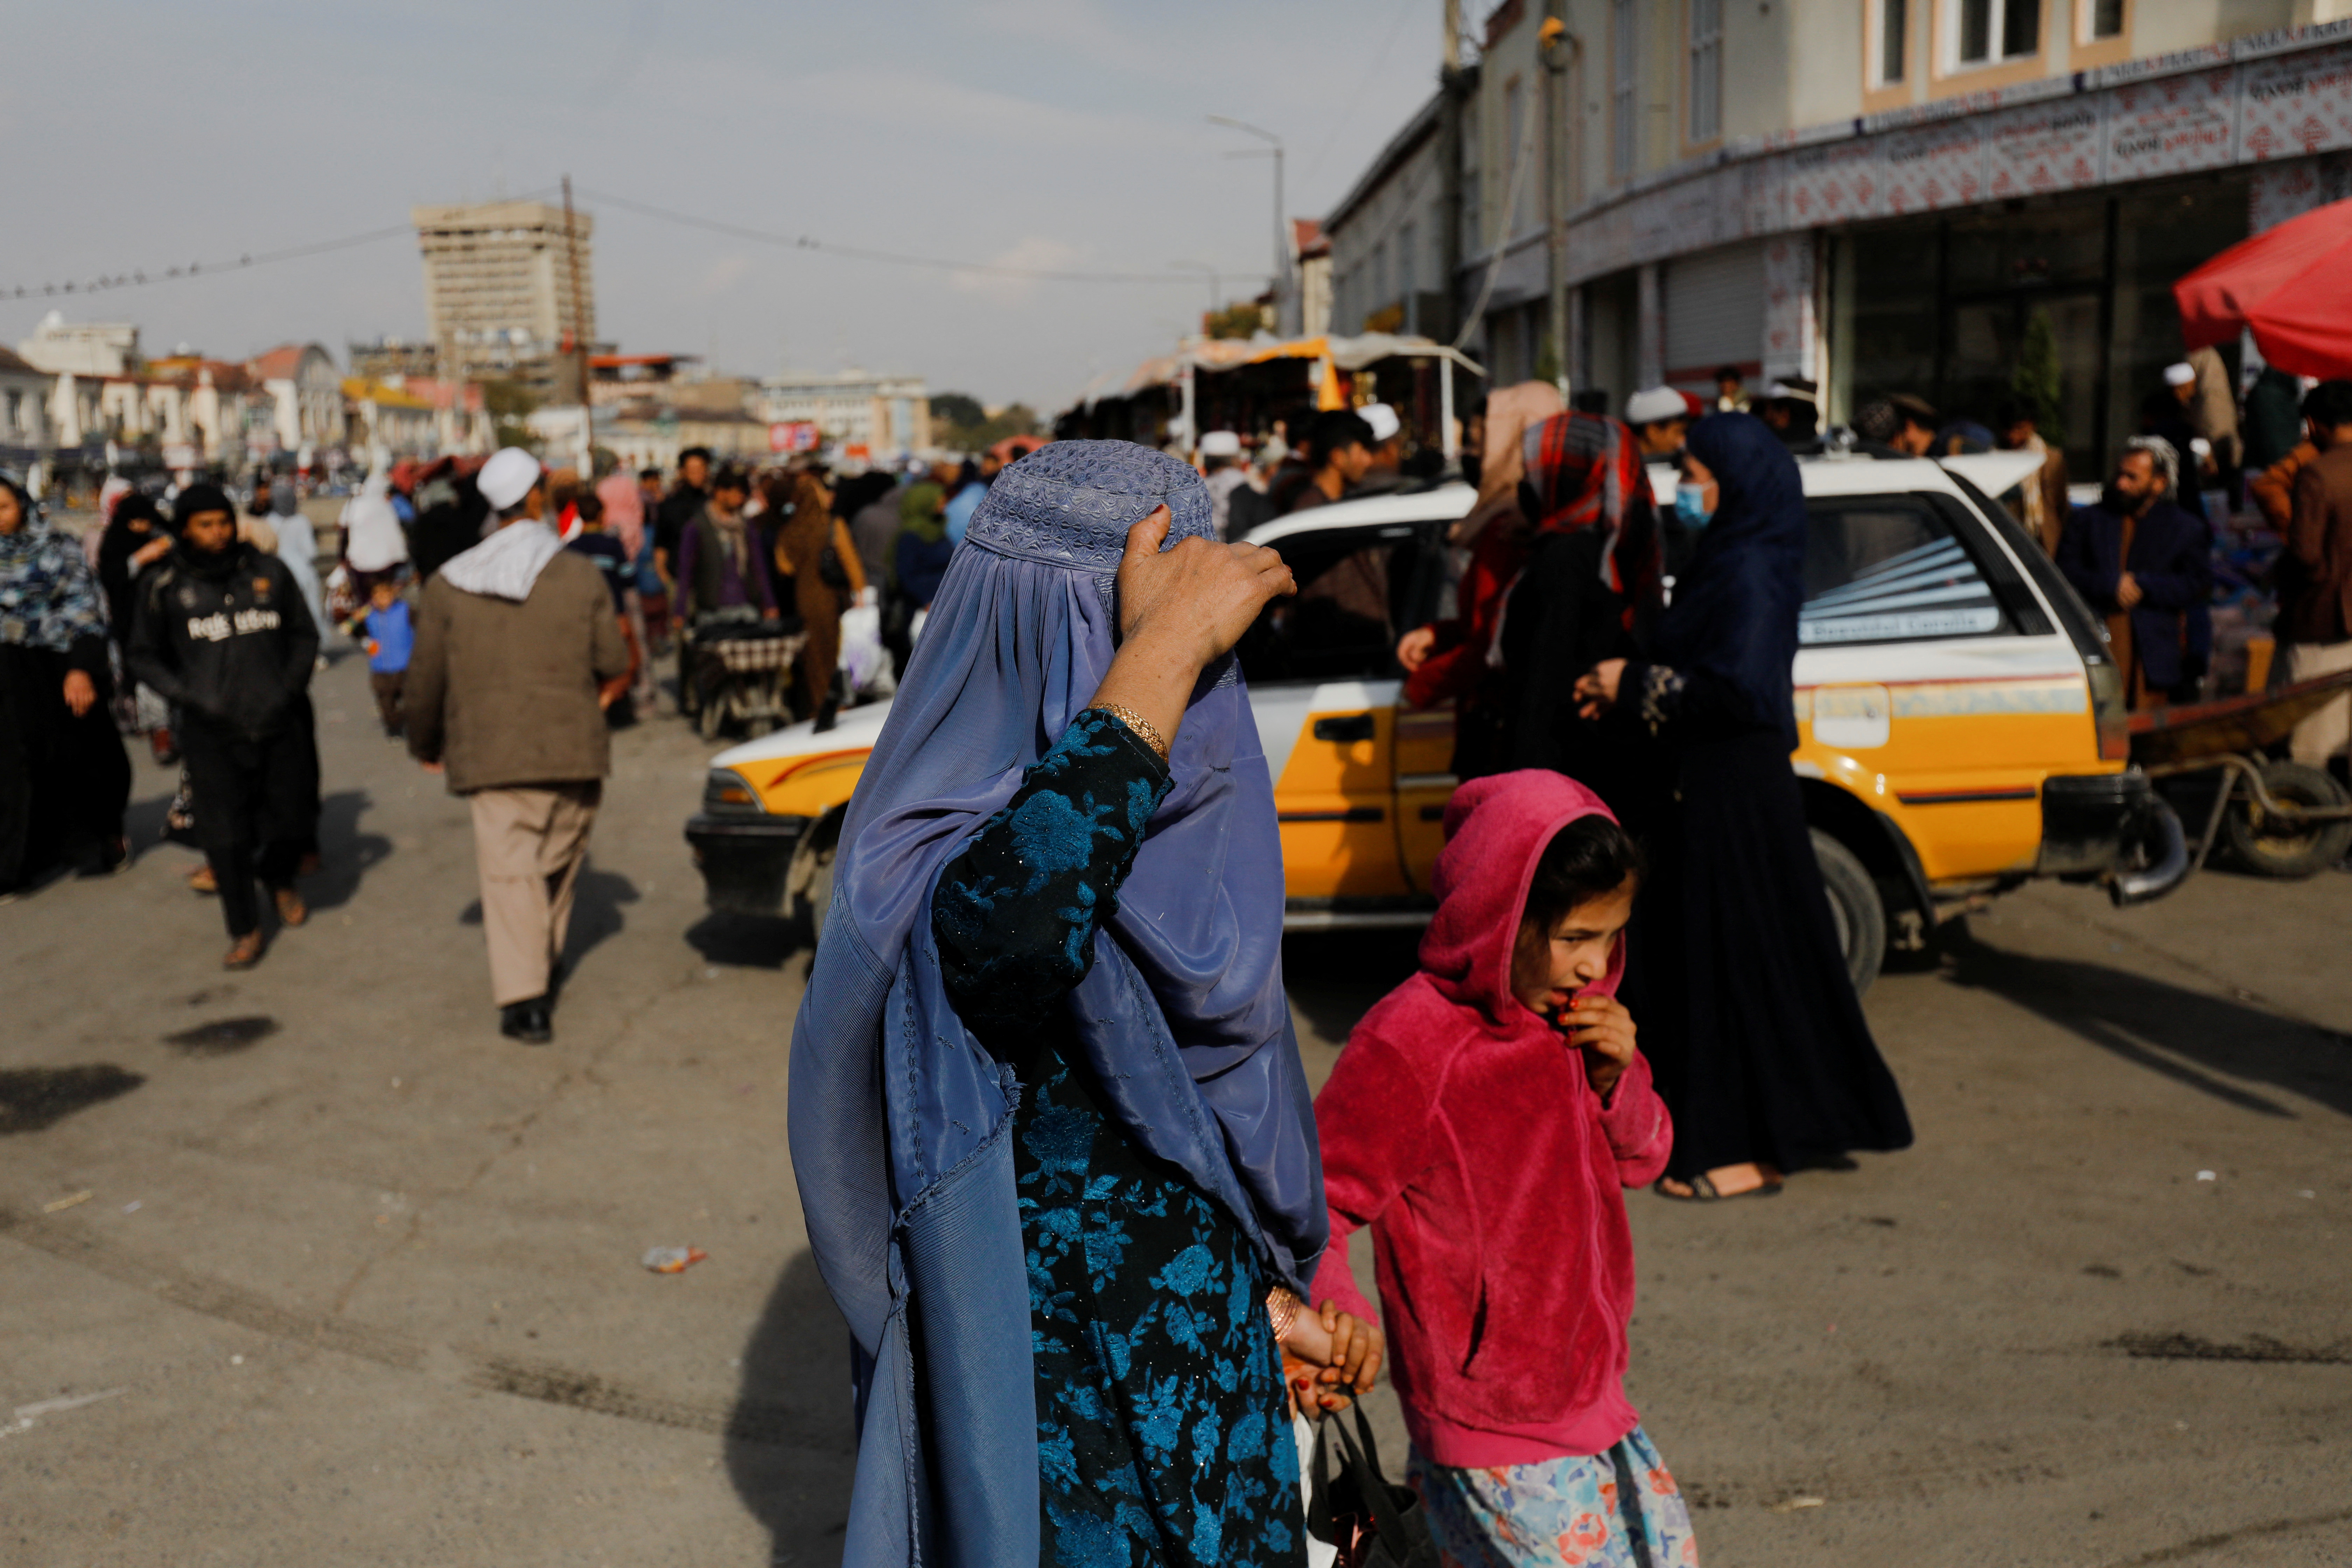 An Afghan woman and a girl walk in a street in Kabul